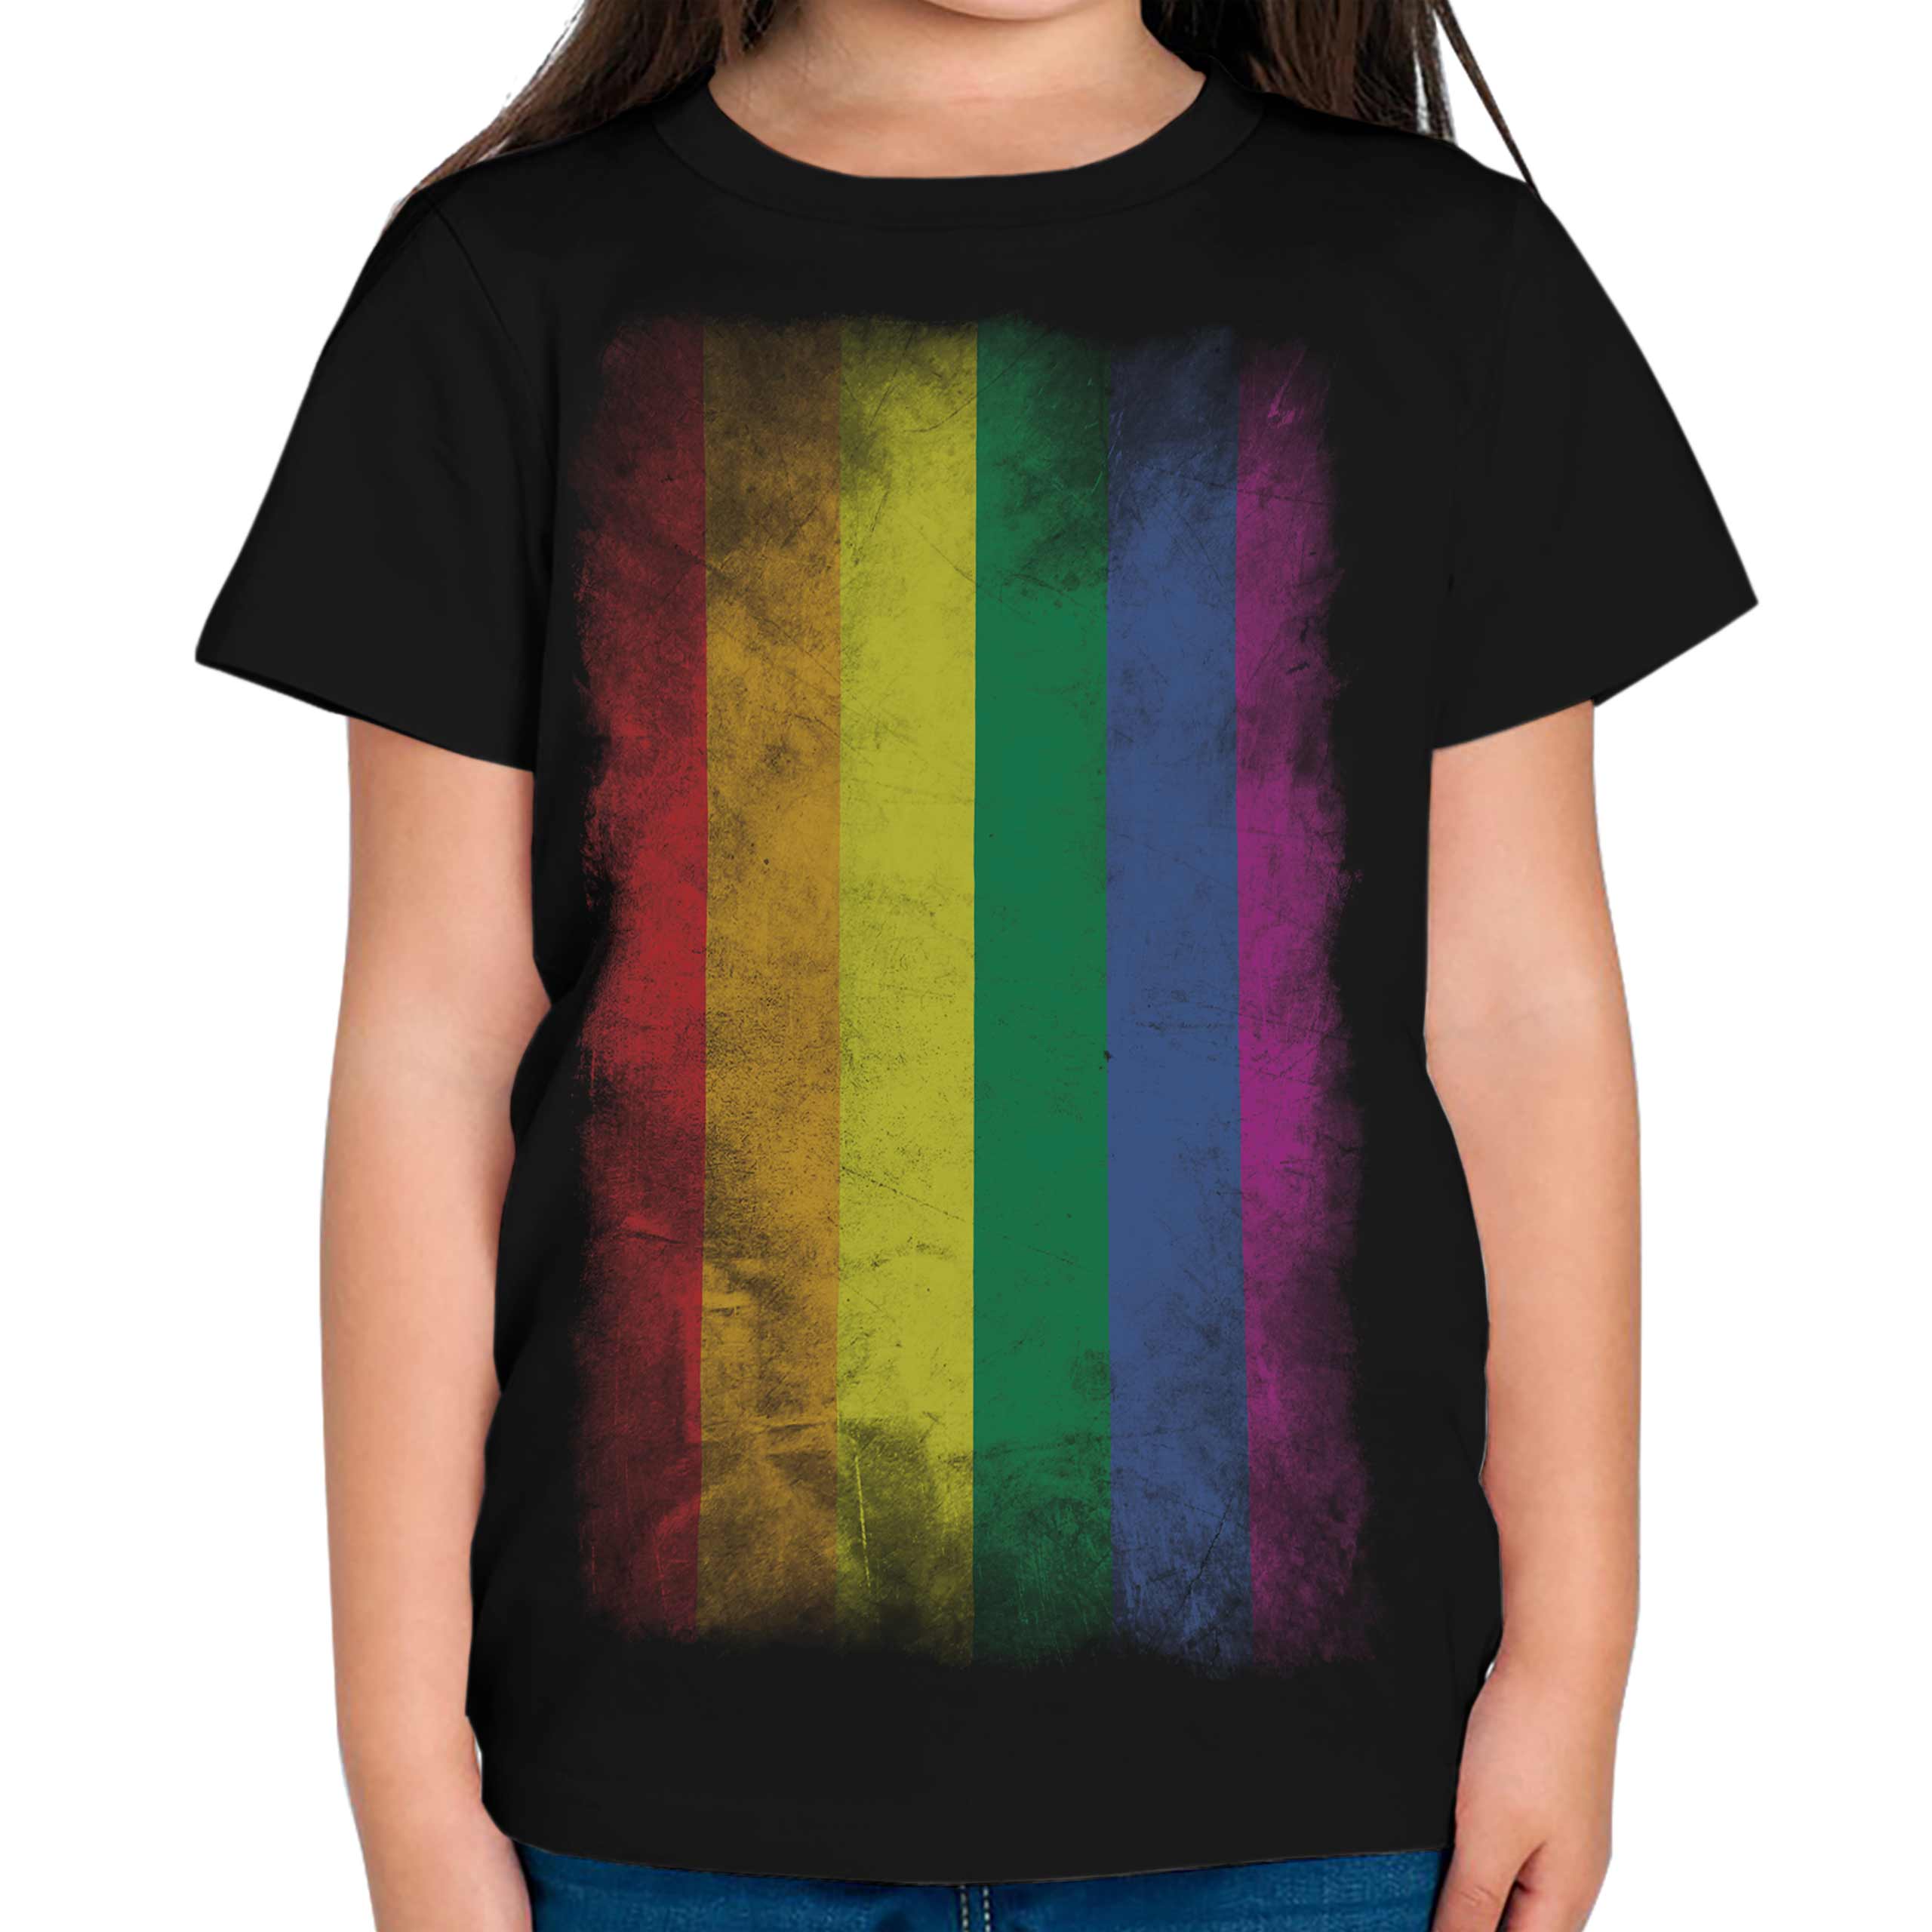 GAY PRIDE FADED FLAG KIDS T-SHIRT TEE TOP RAINBOW LGBT GIFT CLOTHING  CLOTHES | eBay